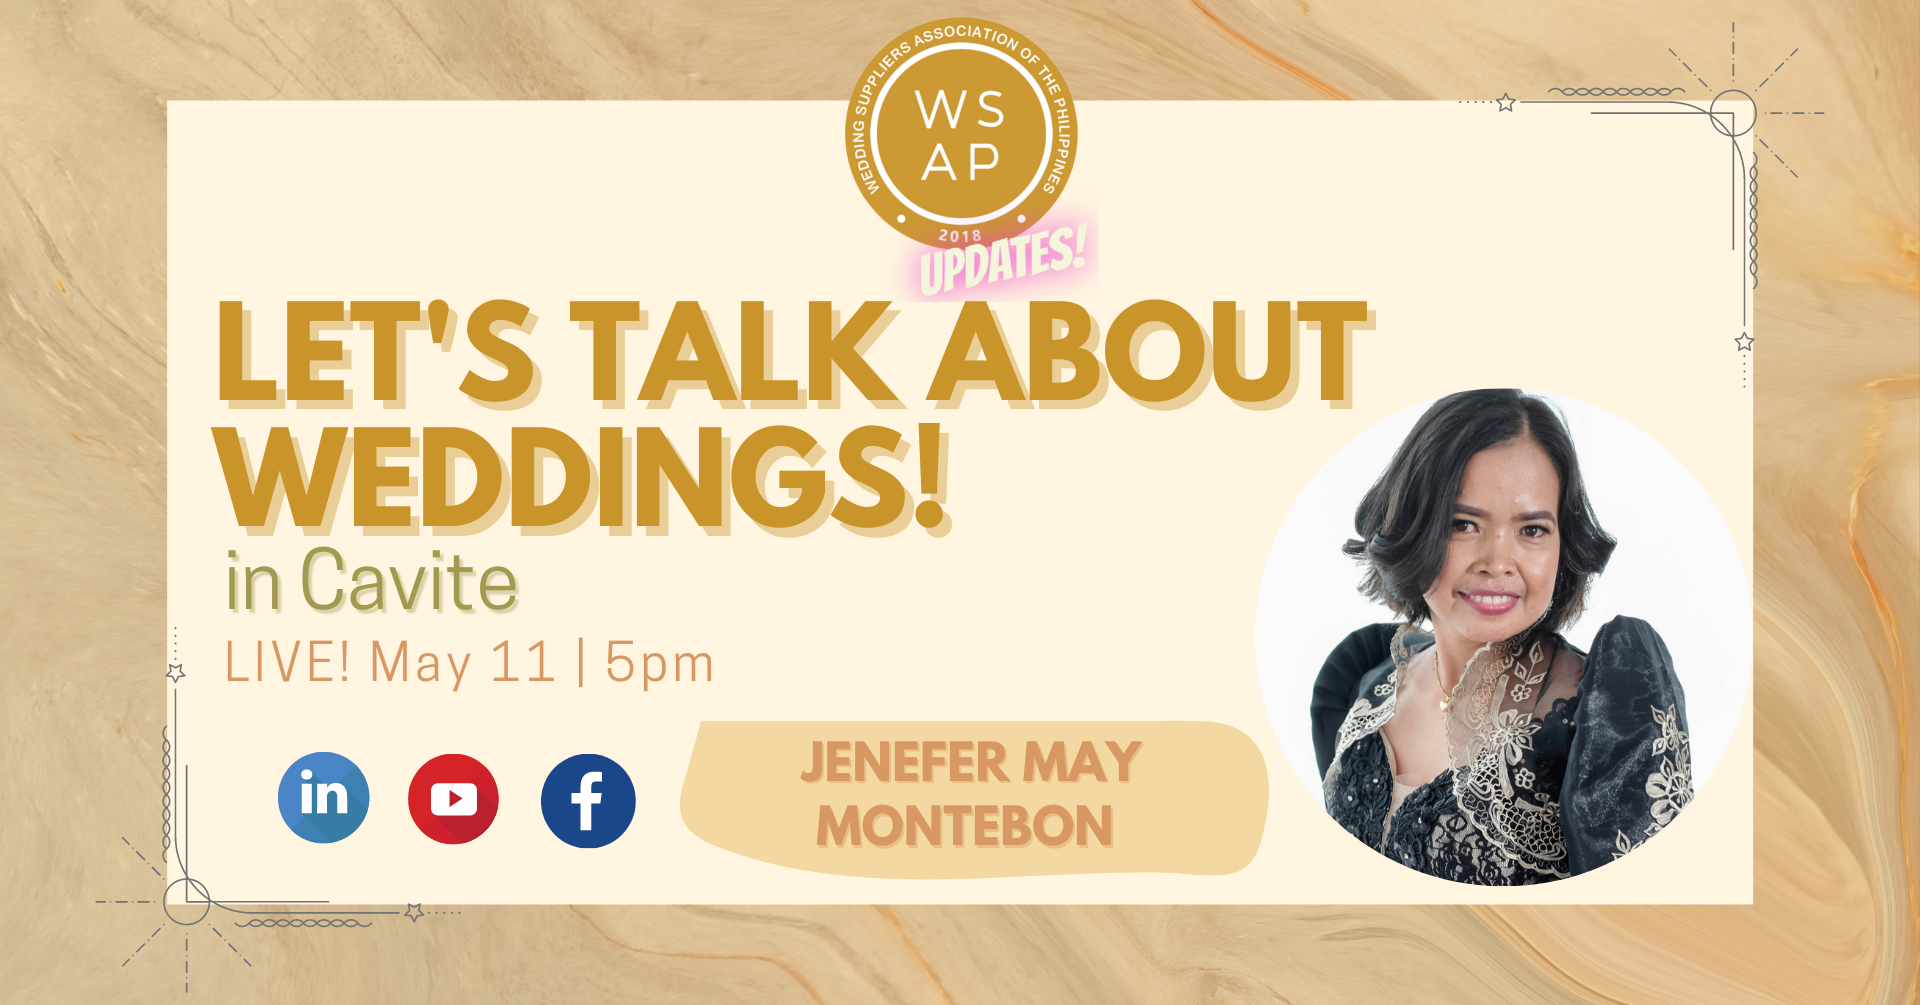 Let's Talk About Weddings in Cavite with Jenefer May Montebon